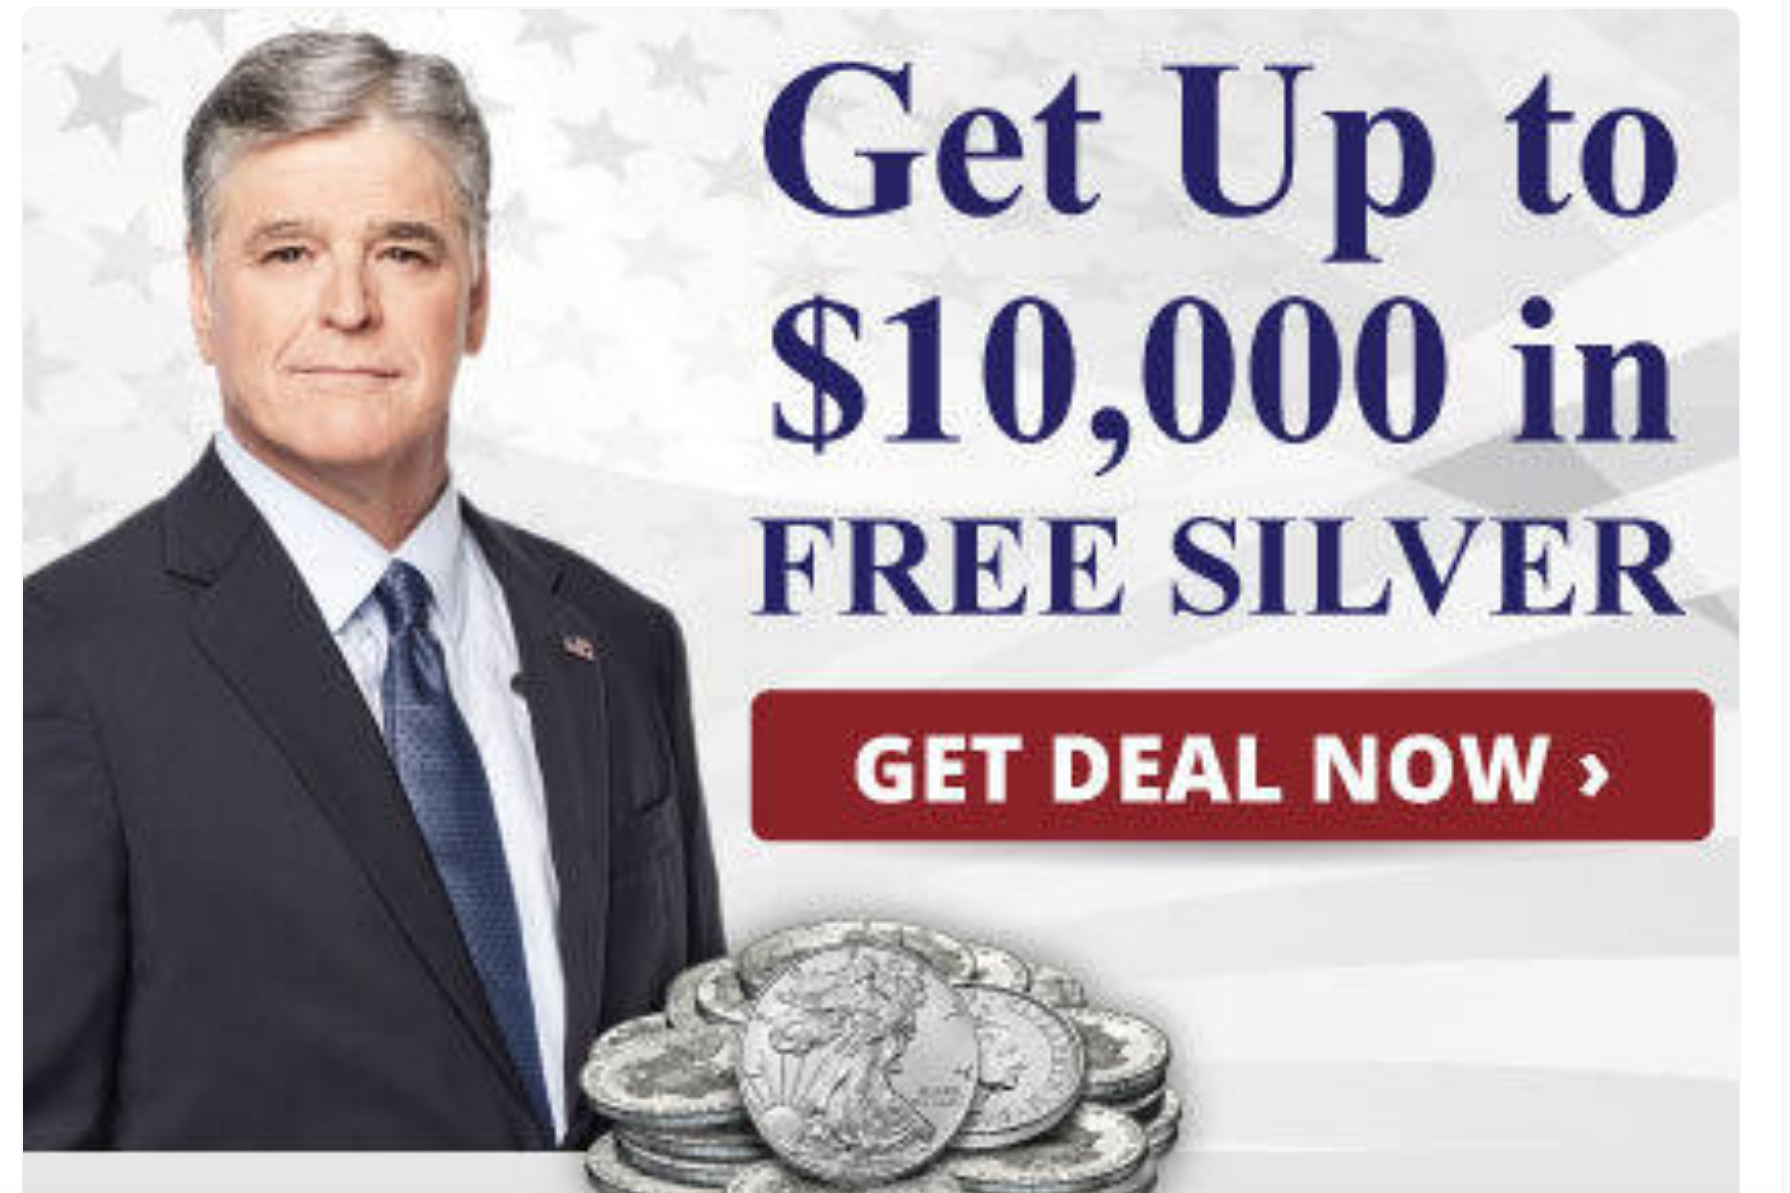 Sean Hannity seen near a pile of silver coins in an ad that reads, "Get Up to $10,000 in Free Silver. Get Deal Now."